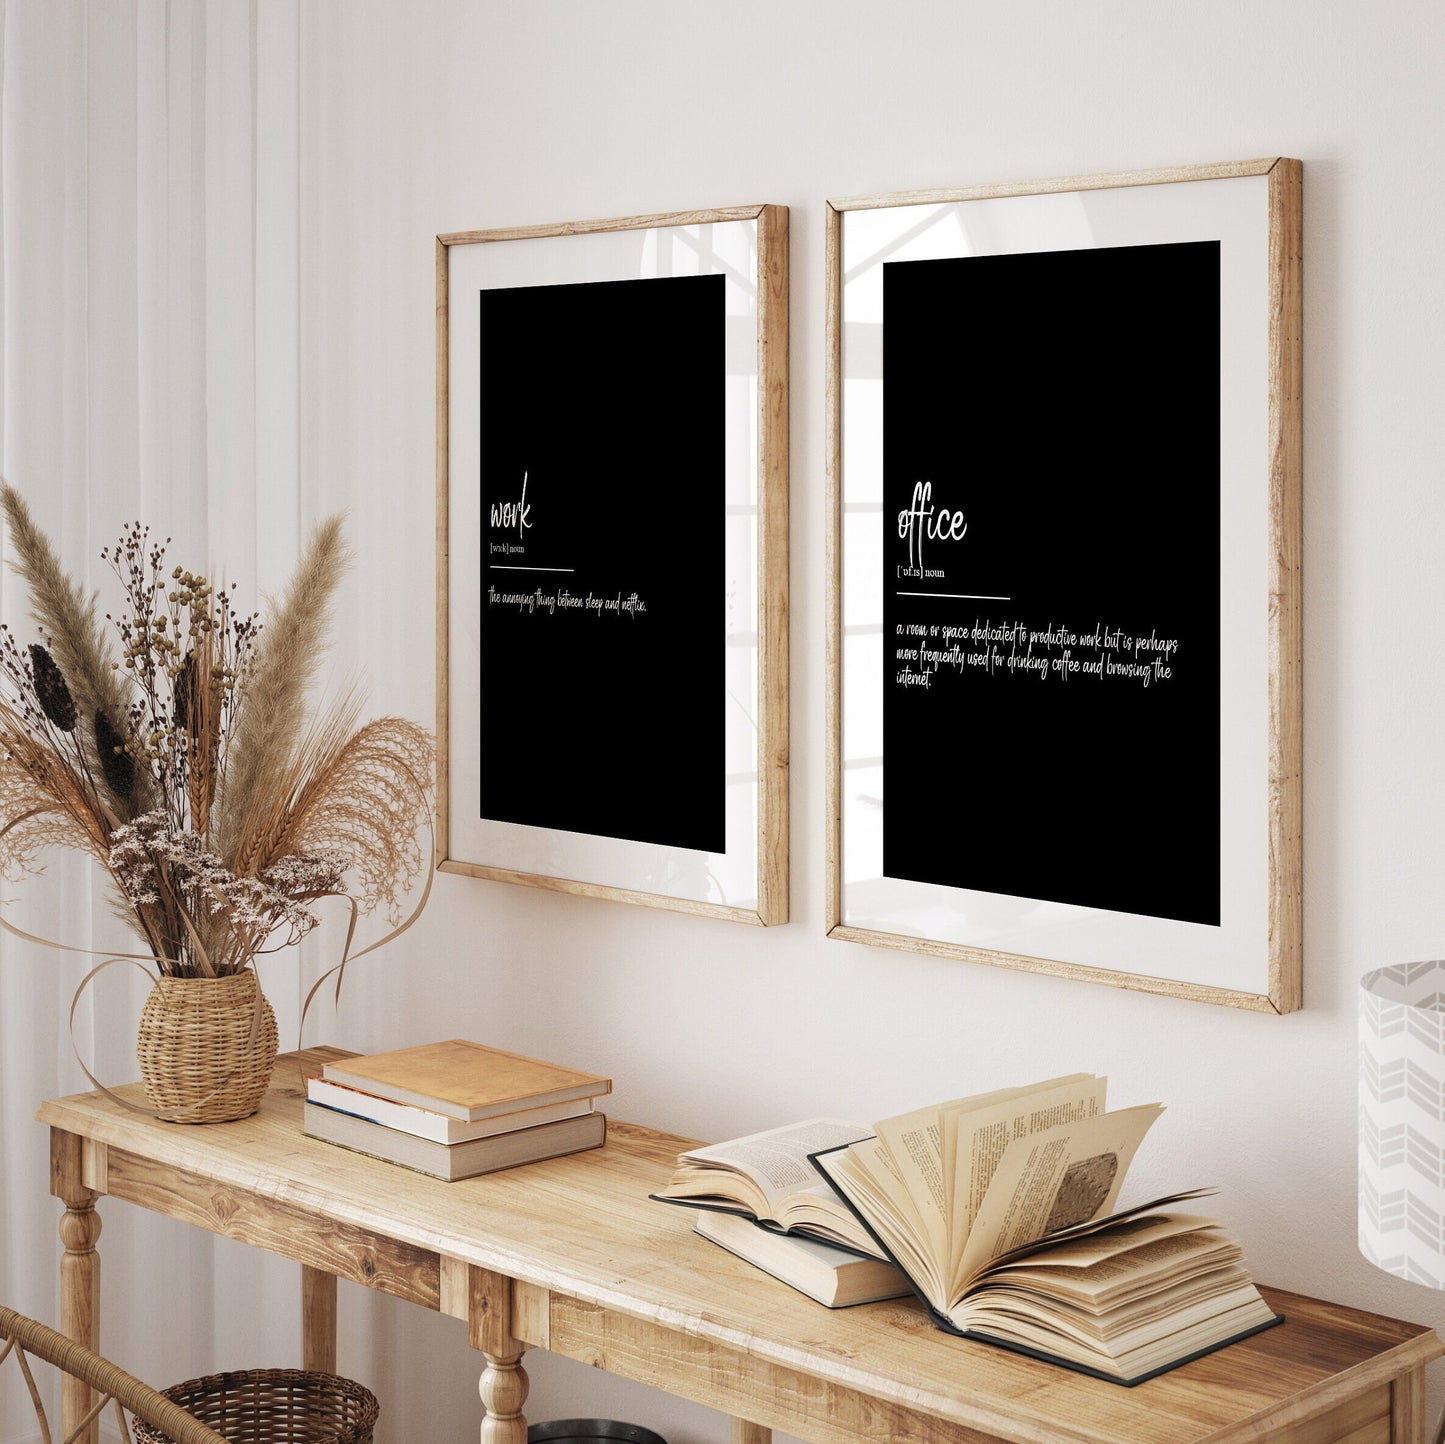 Office Work Set Of 2 Definition Prints - Magic Posters